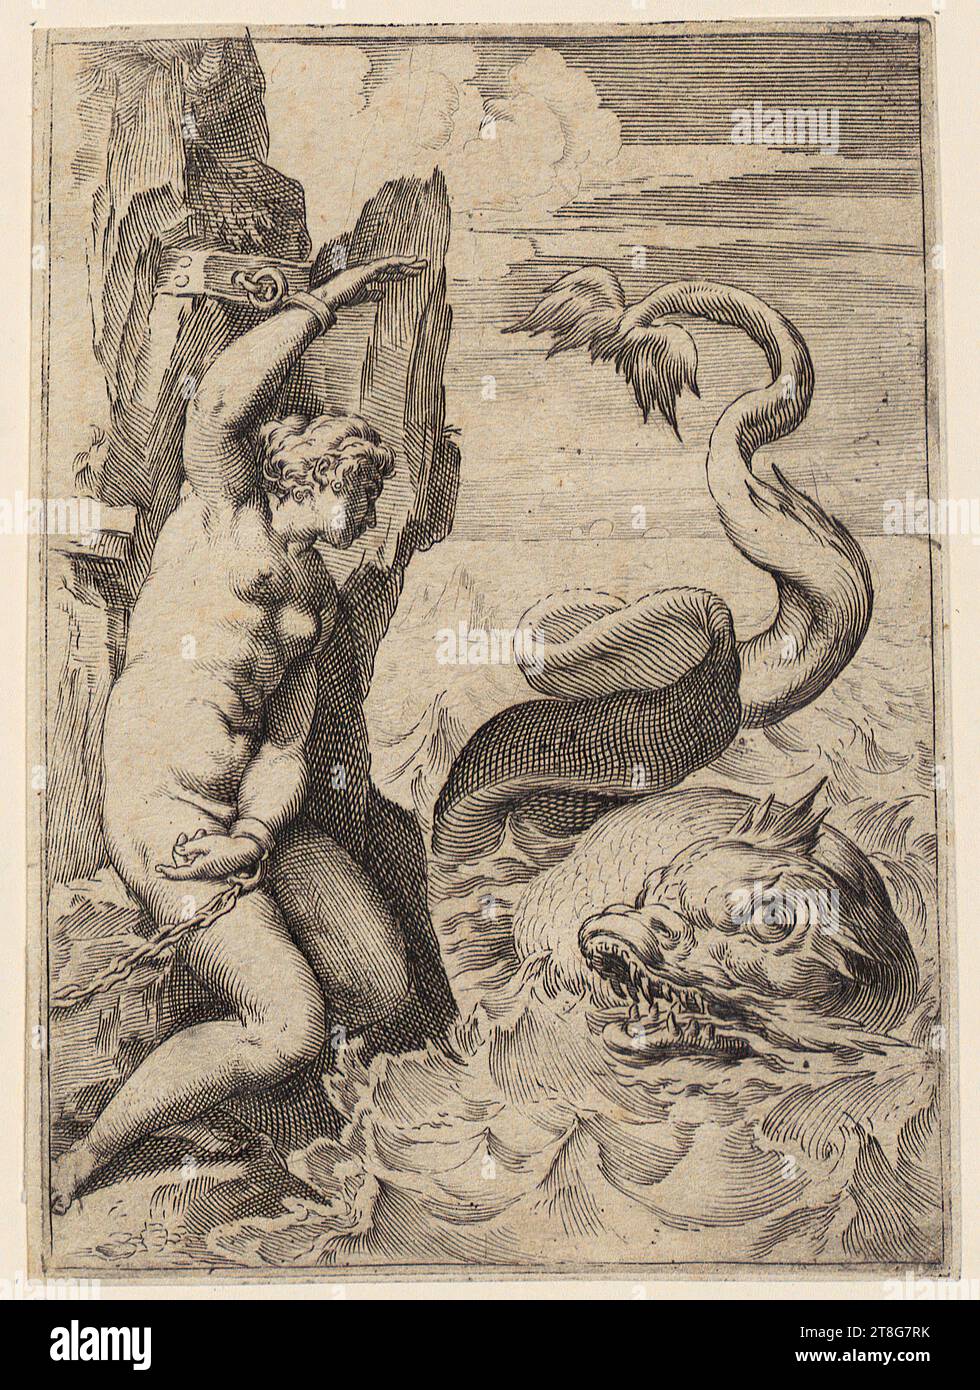 Anonymous (dating unknown), etcher Agostino Carracci (1557 - 1602), copy after Orpheus and Eurydice, sheet of the set 'Lascivie', Anonymous (dating unknown), engraver Agostino Carracci (1557 - 1602), copy after Orpheus and Eurydice, sheet of the set 'Lascivie', Agostino Carracci (1557 - 1602), artist, Andromeda, sheet of the set 'Lascivie', origin of the print carrier: Around 1590 - 1595, copperplate engraving, sheet size: 15. 3 x 11.4 cm Stock Photo